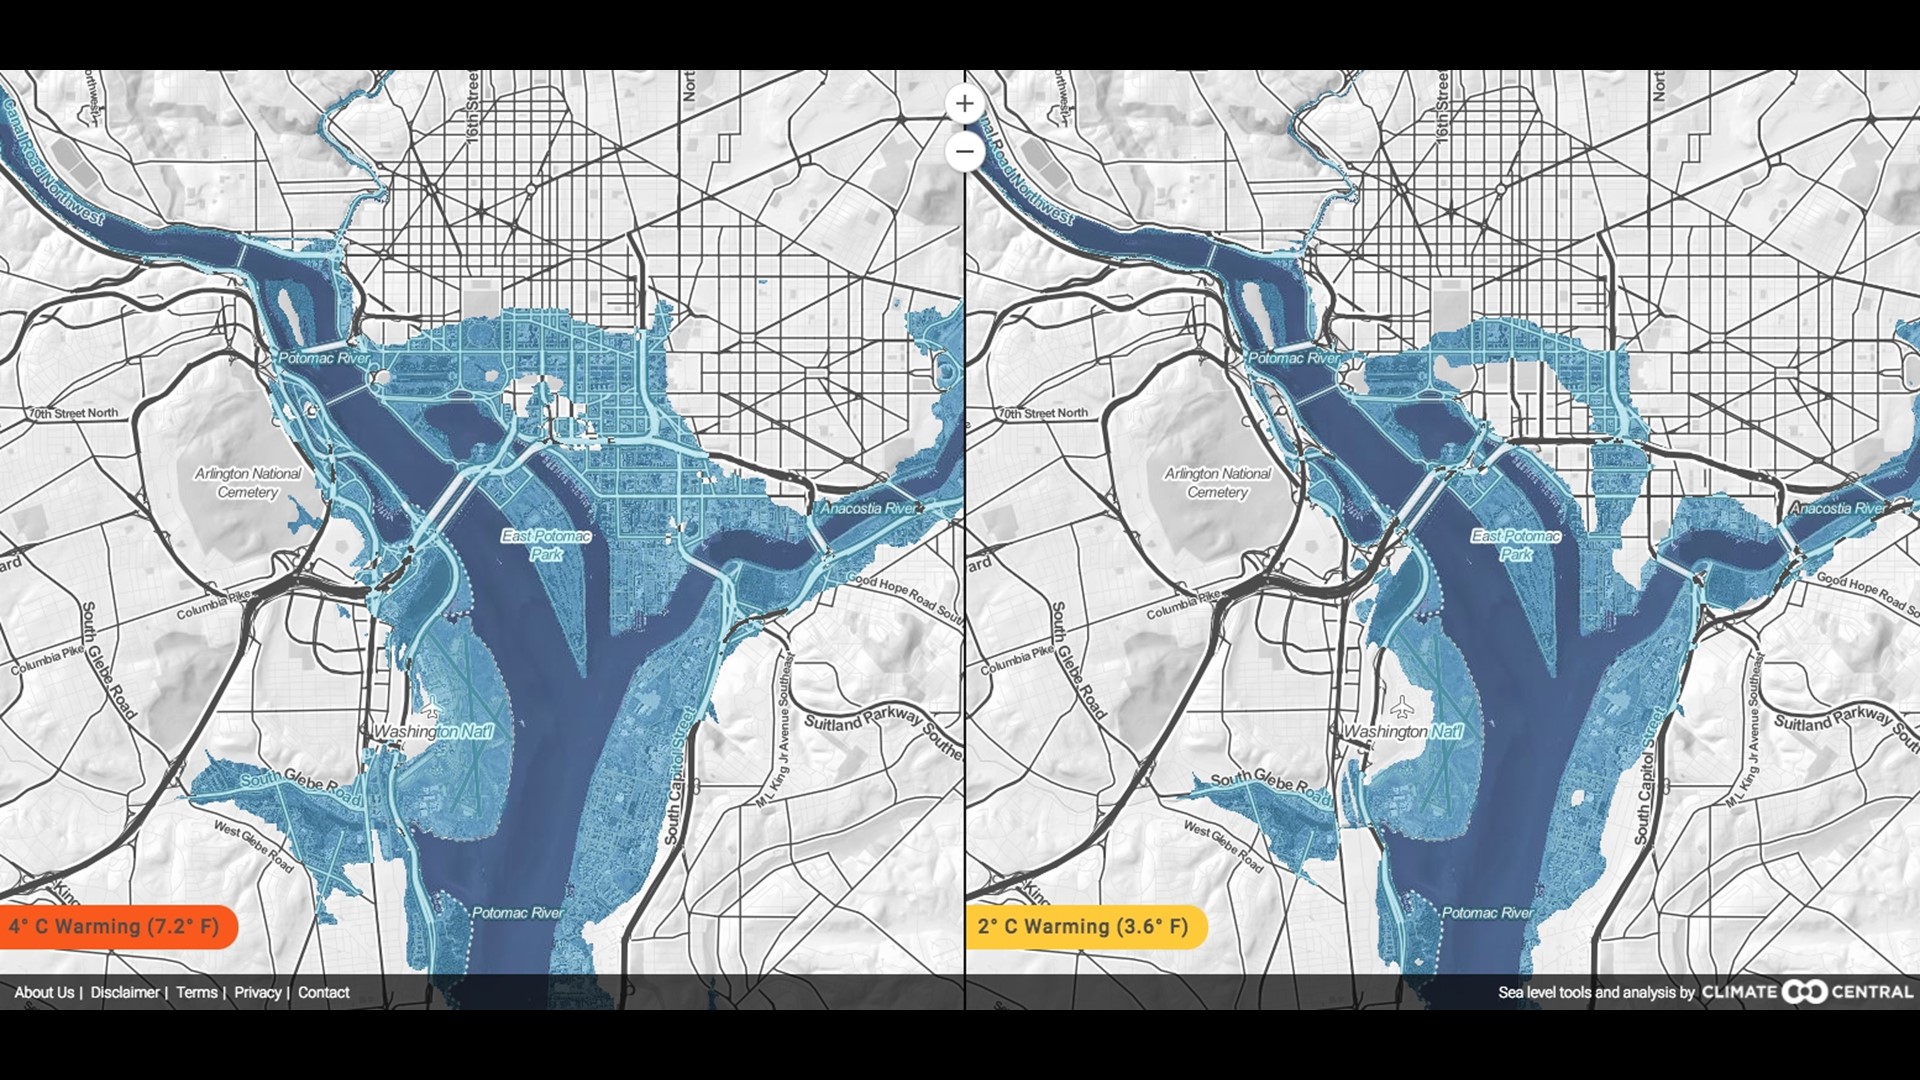 Potomac and Anacostia rivers are tidal rivers